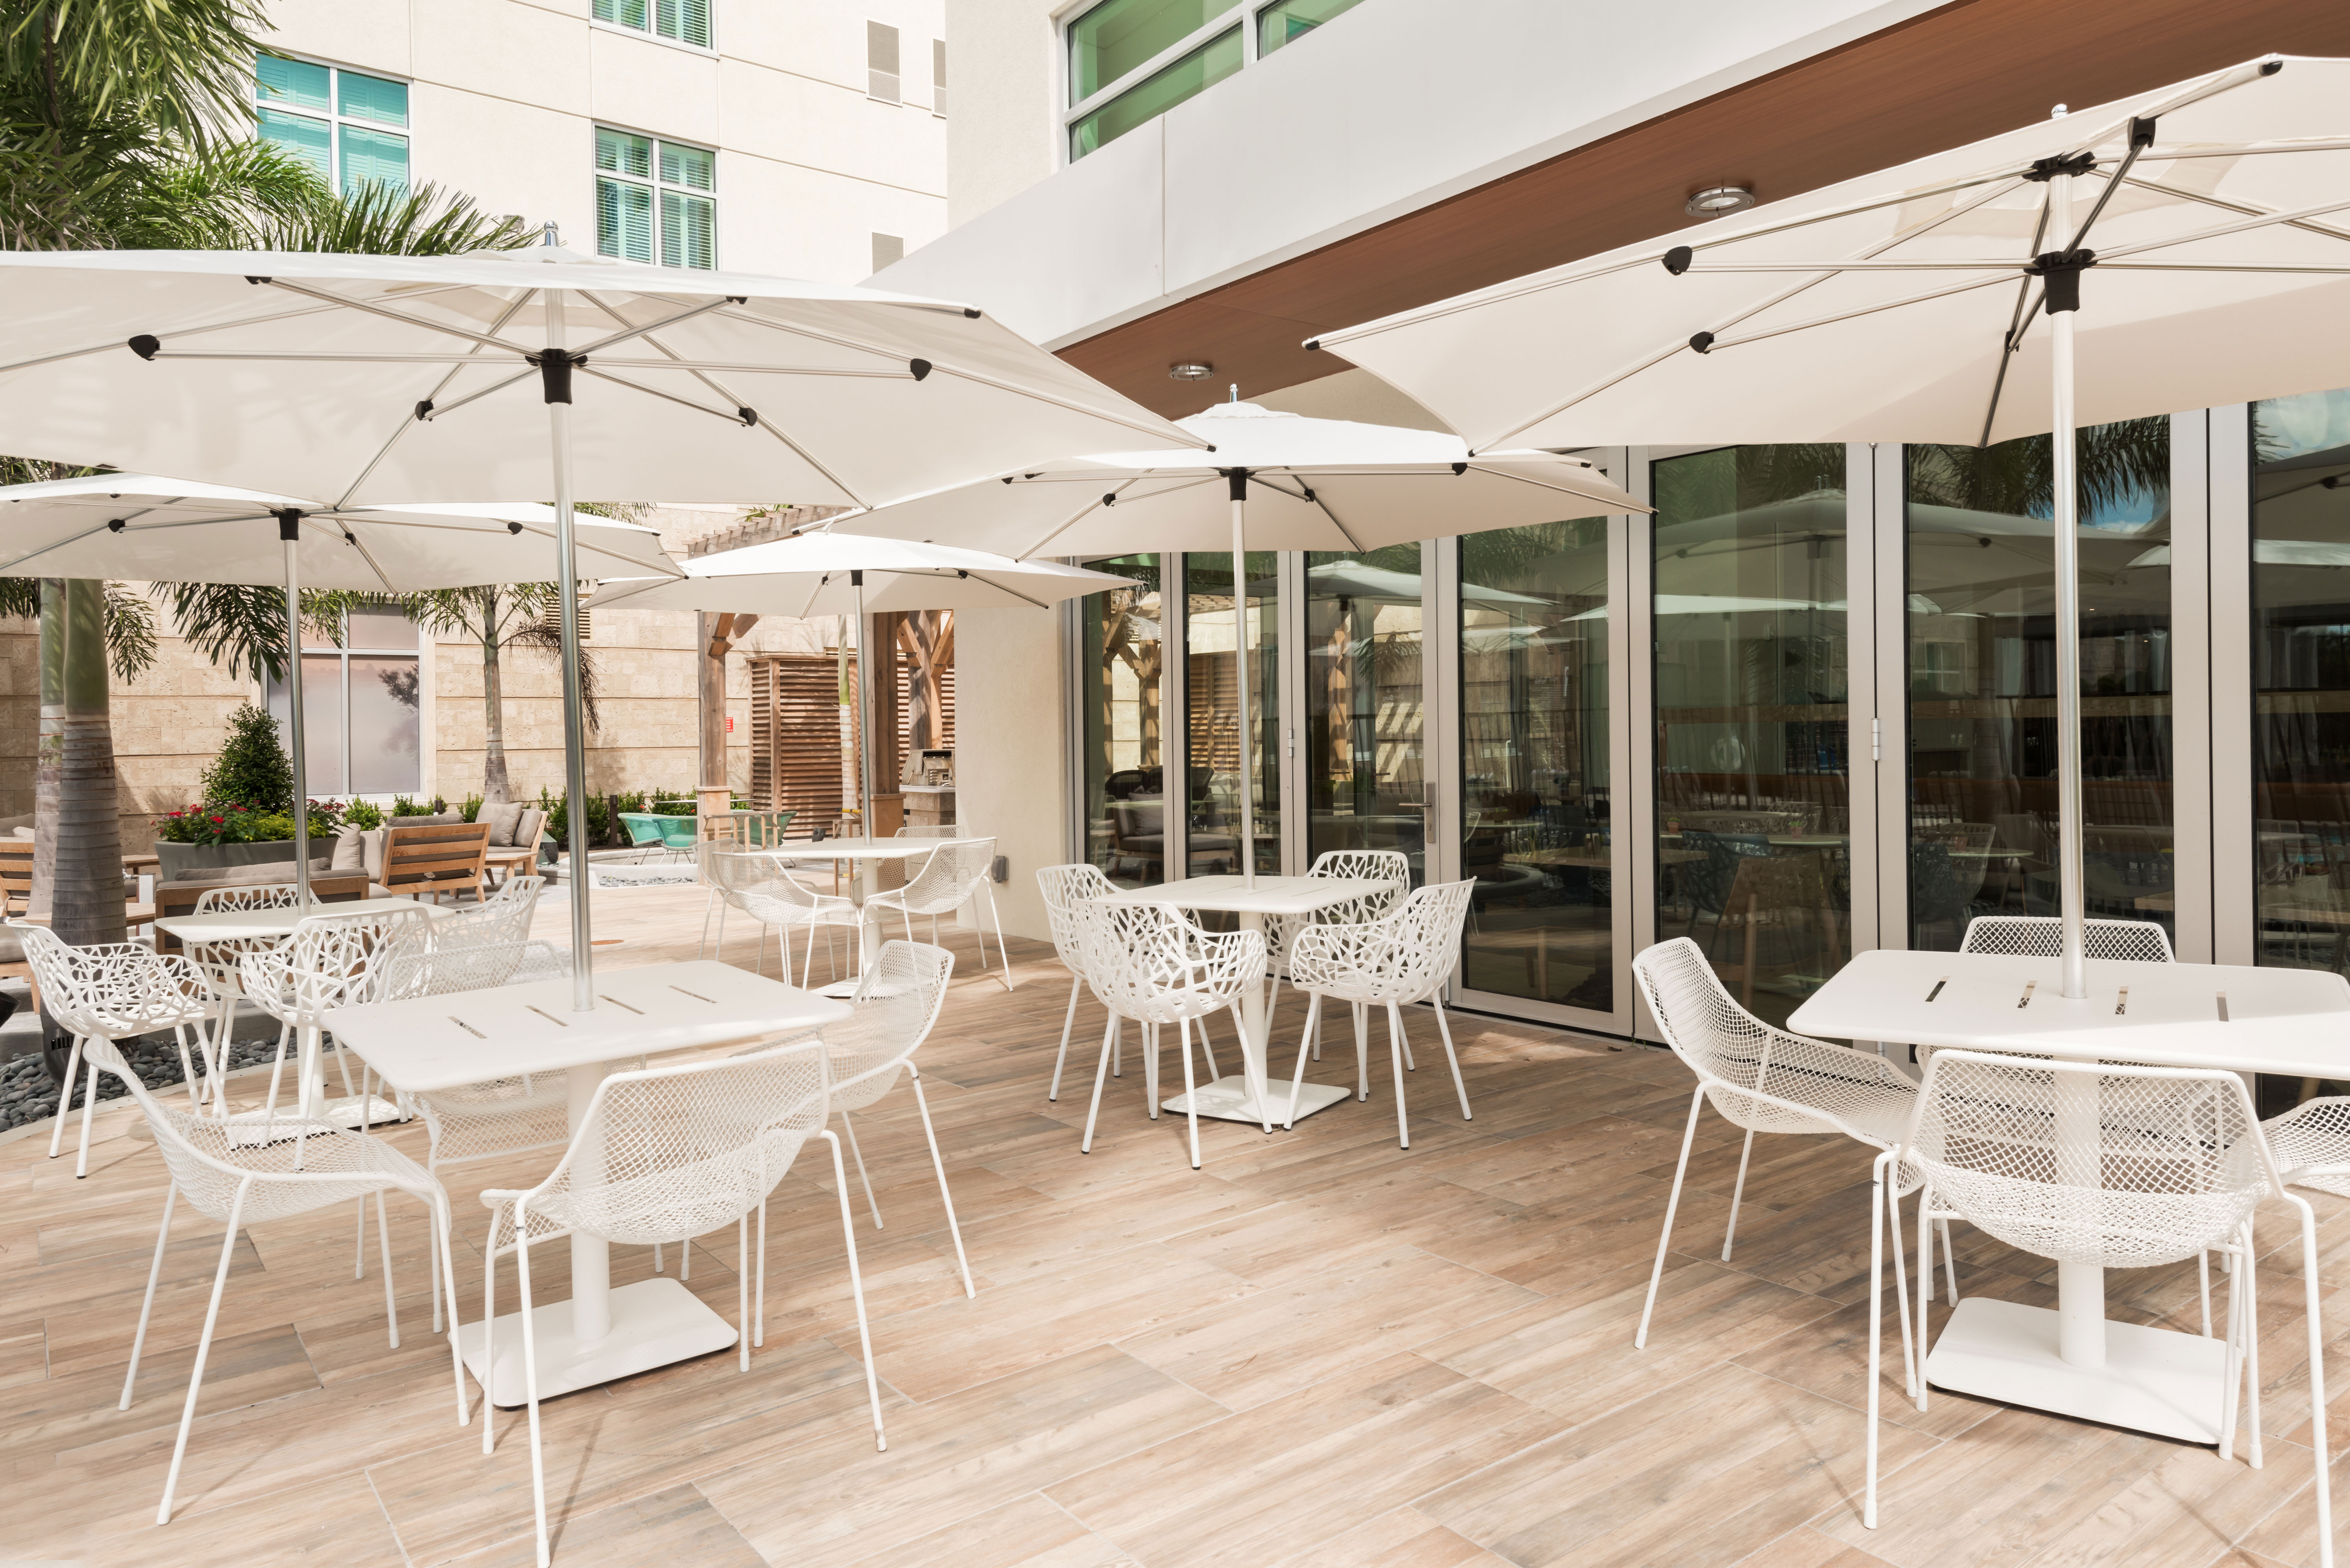 Outdoor Patio Seating With Five Tables, Chairs and Sun Umbrellas